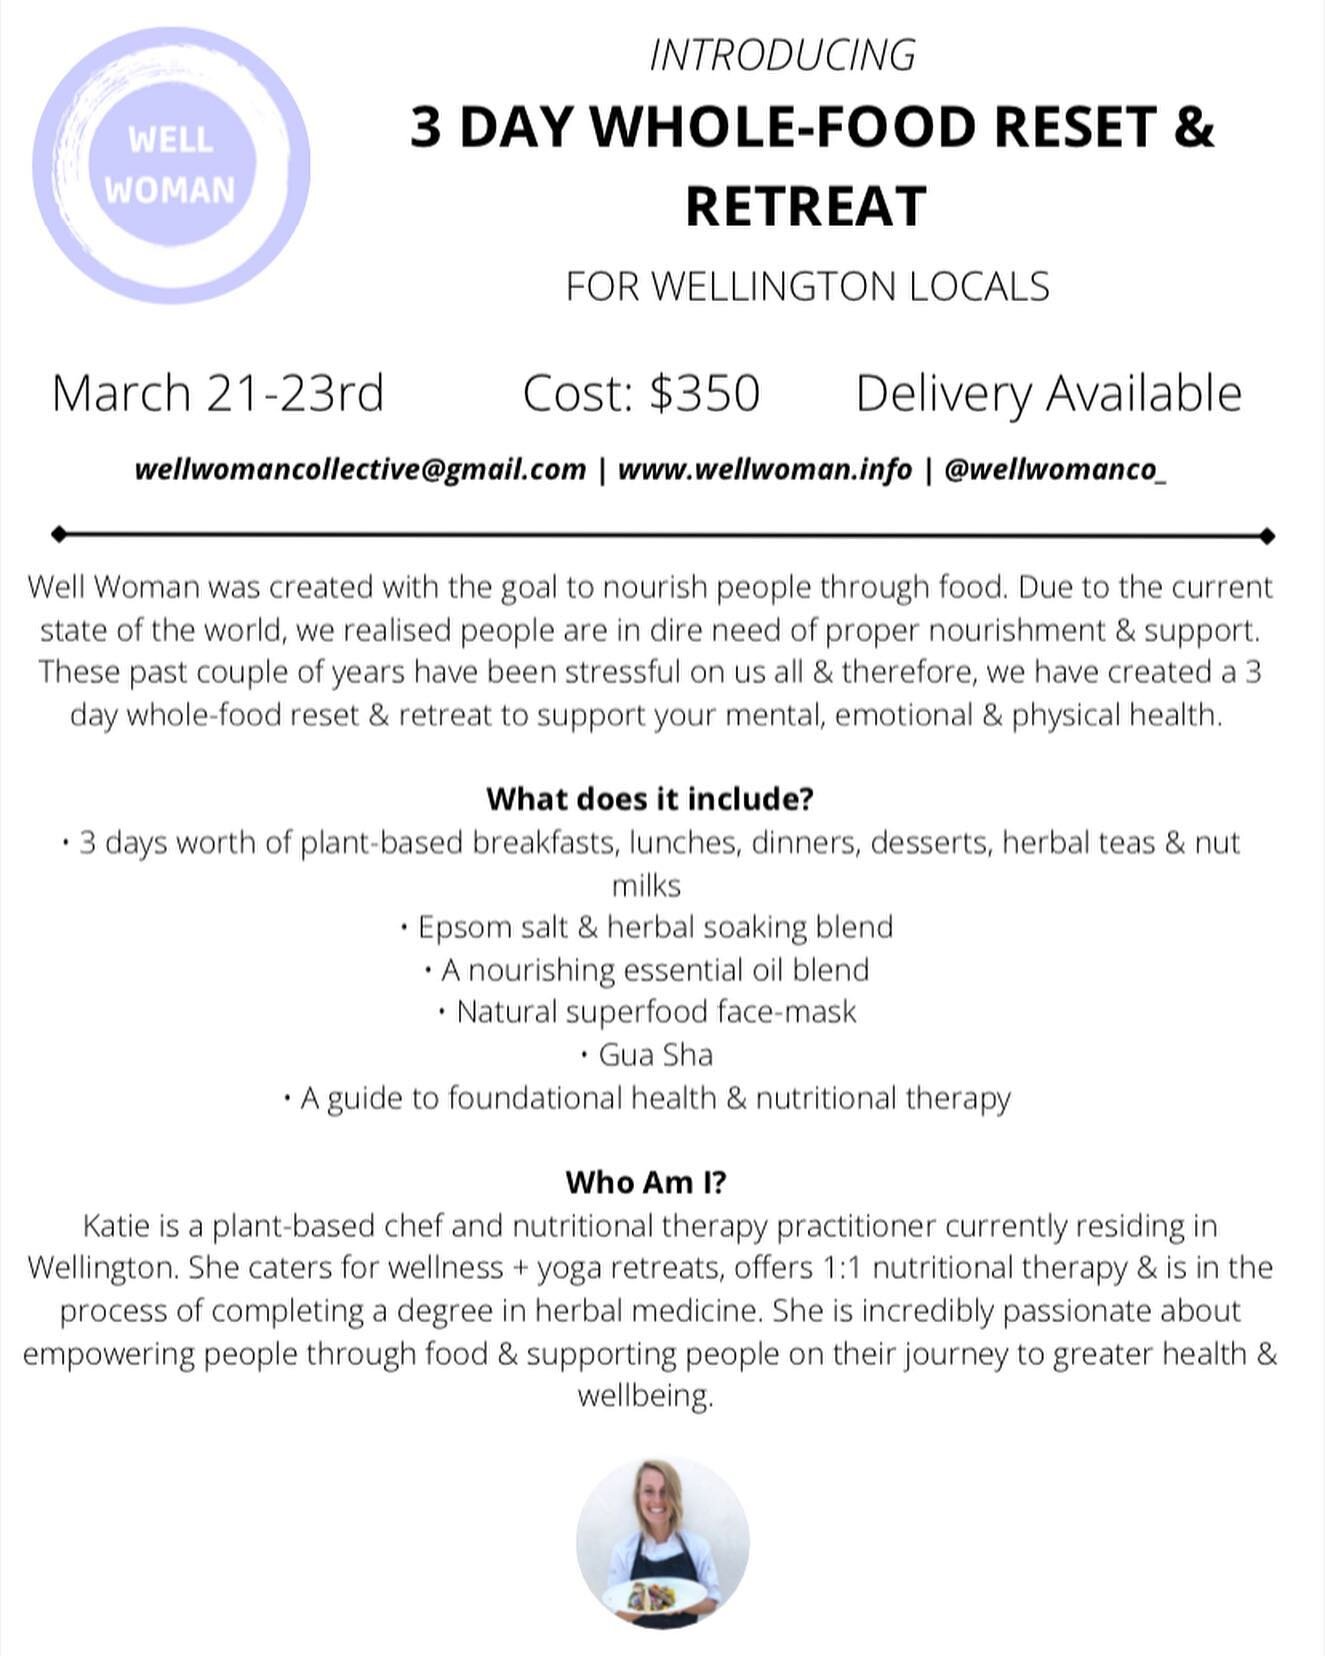 Hi friends! 

Since my most of my work for the year has been cancelled due to current events, I&rsquo;ve decided to offer an at home 3 day whole-food reset + retreat for Wellington locals. I am so deeply passionate about the work I offer &amp; believ